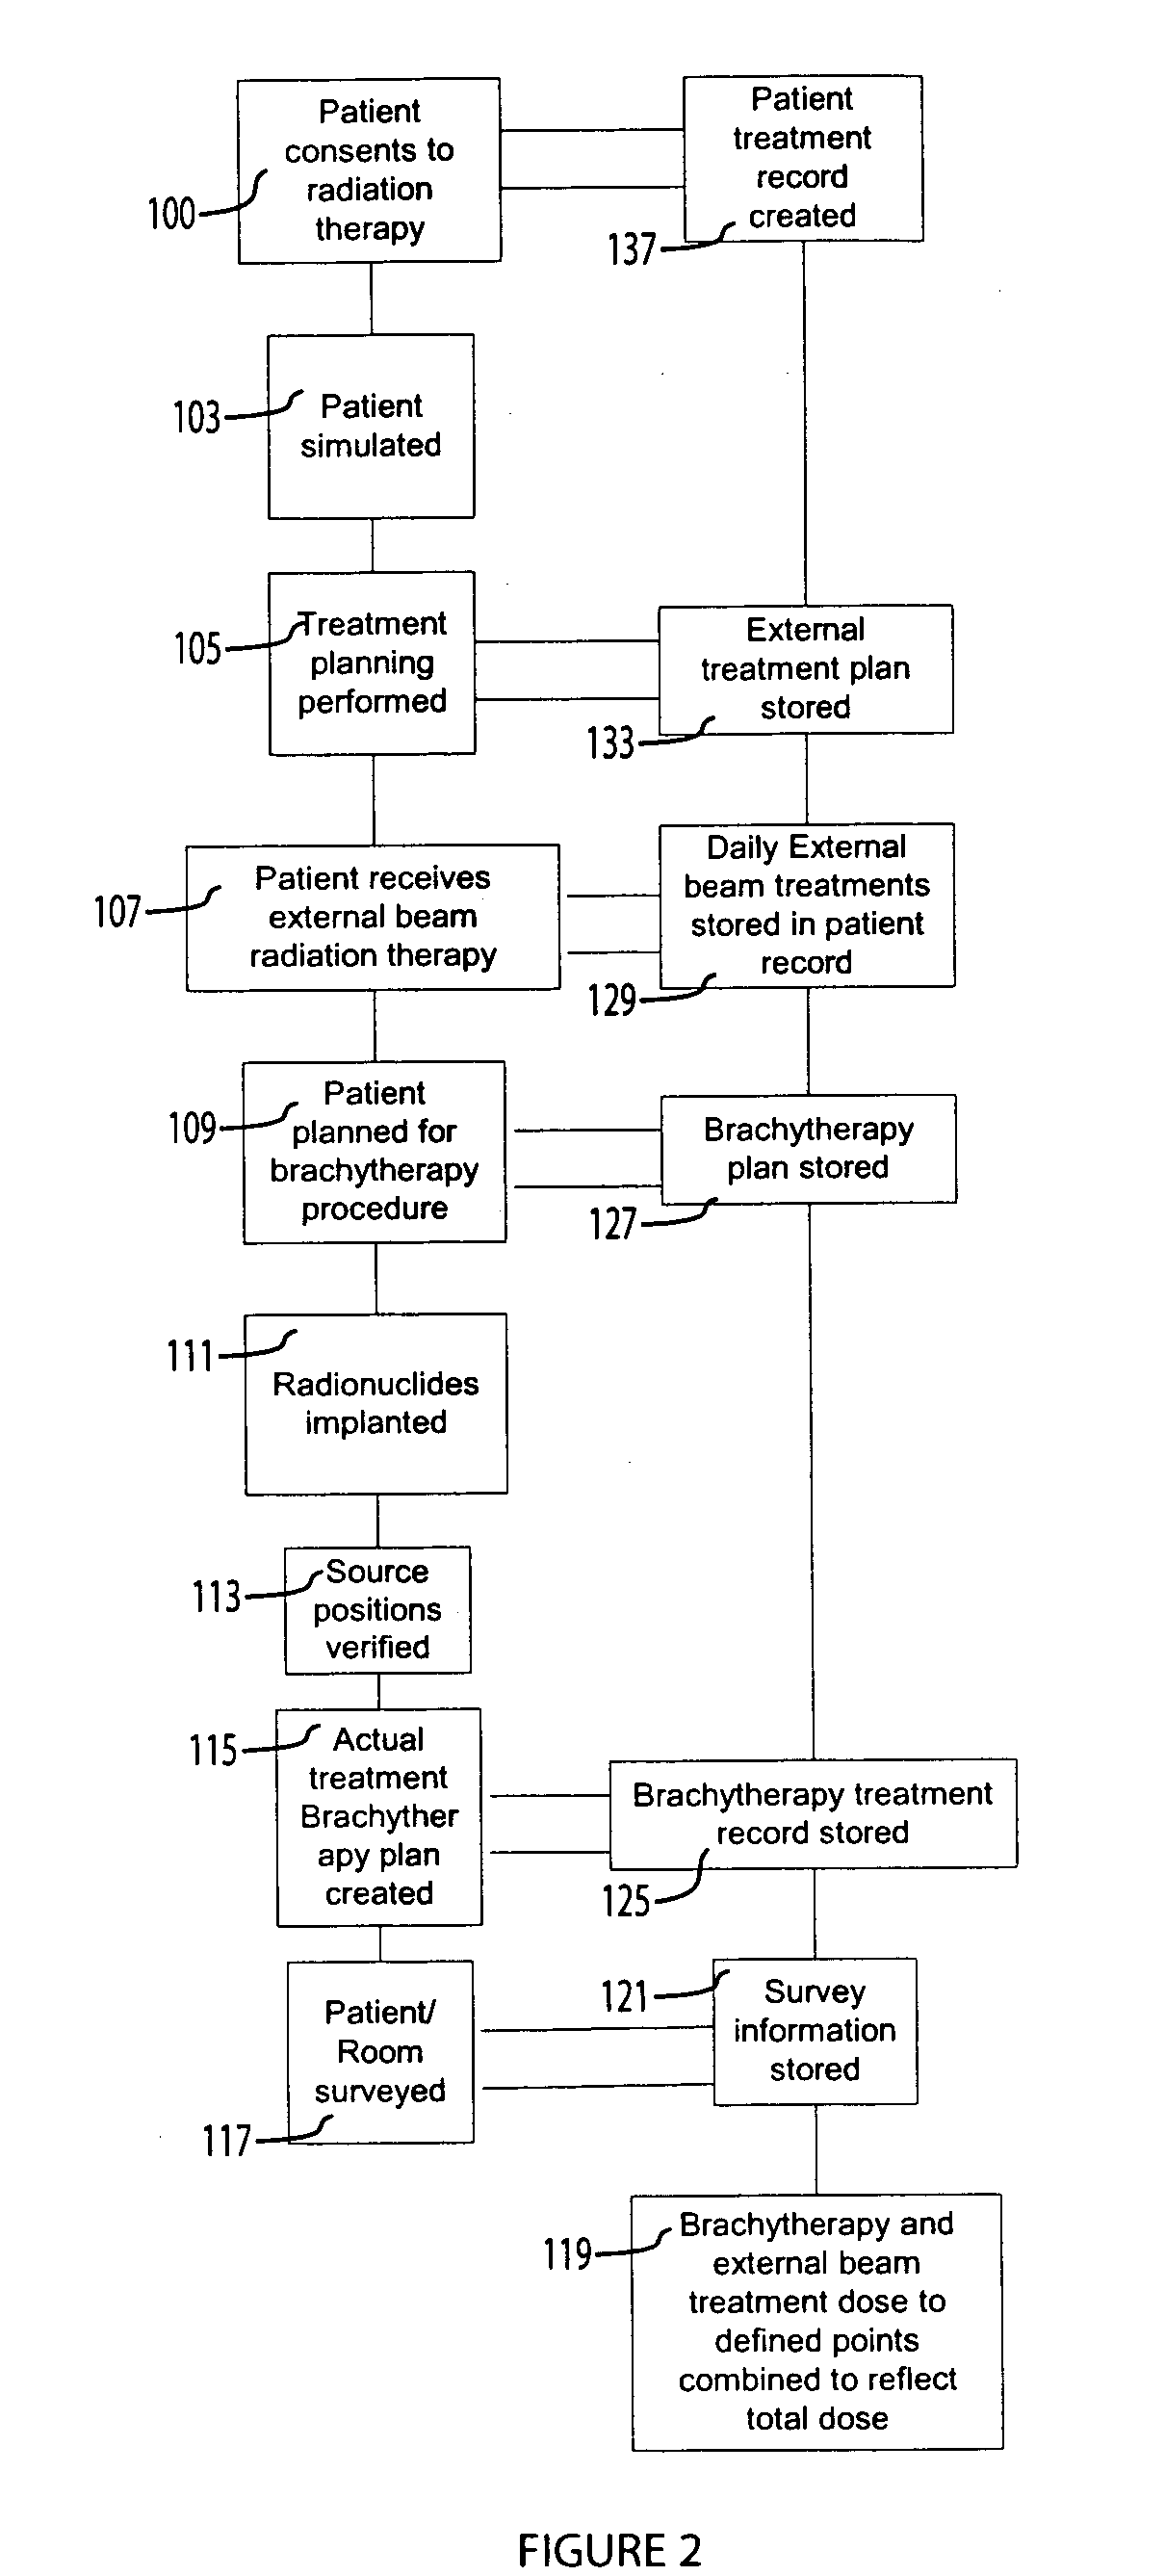 System for processing patient radiation treatment data